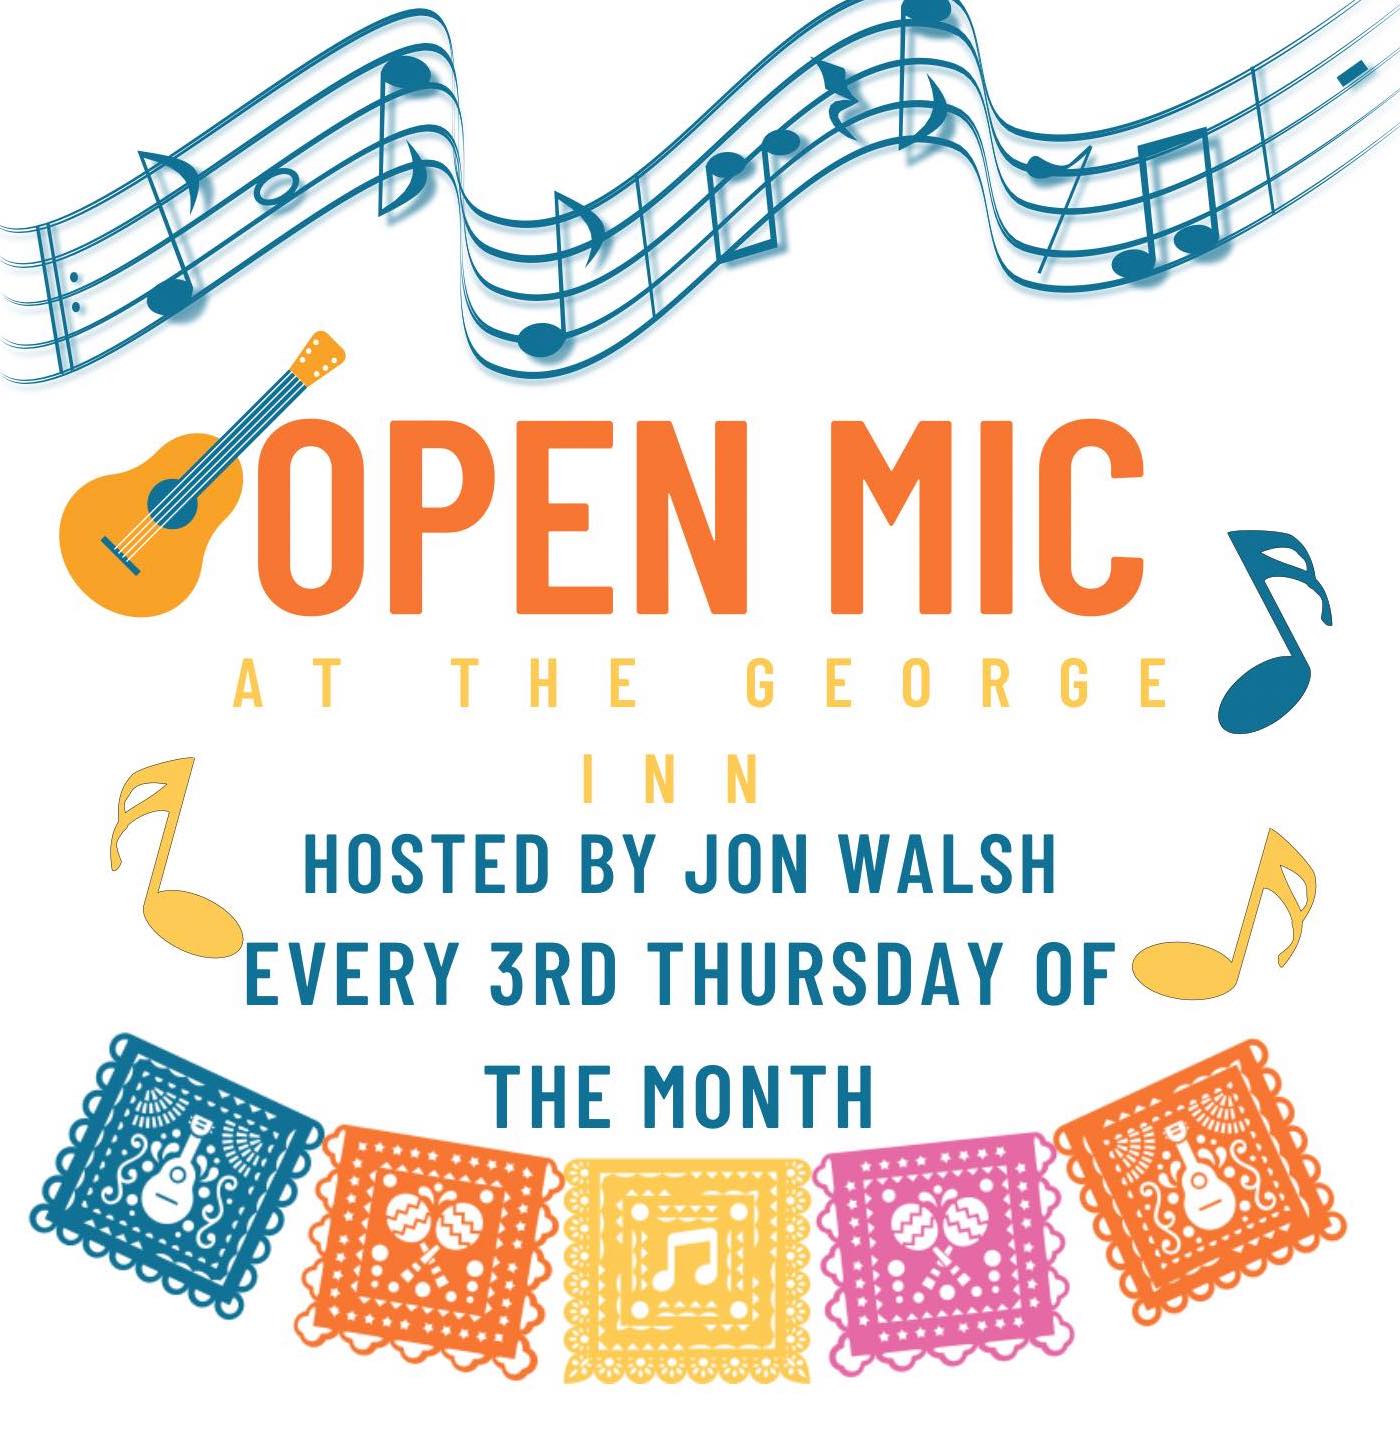 ACOUSTIC OPEN MIC SESSION at The George, Middle Wallop